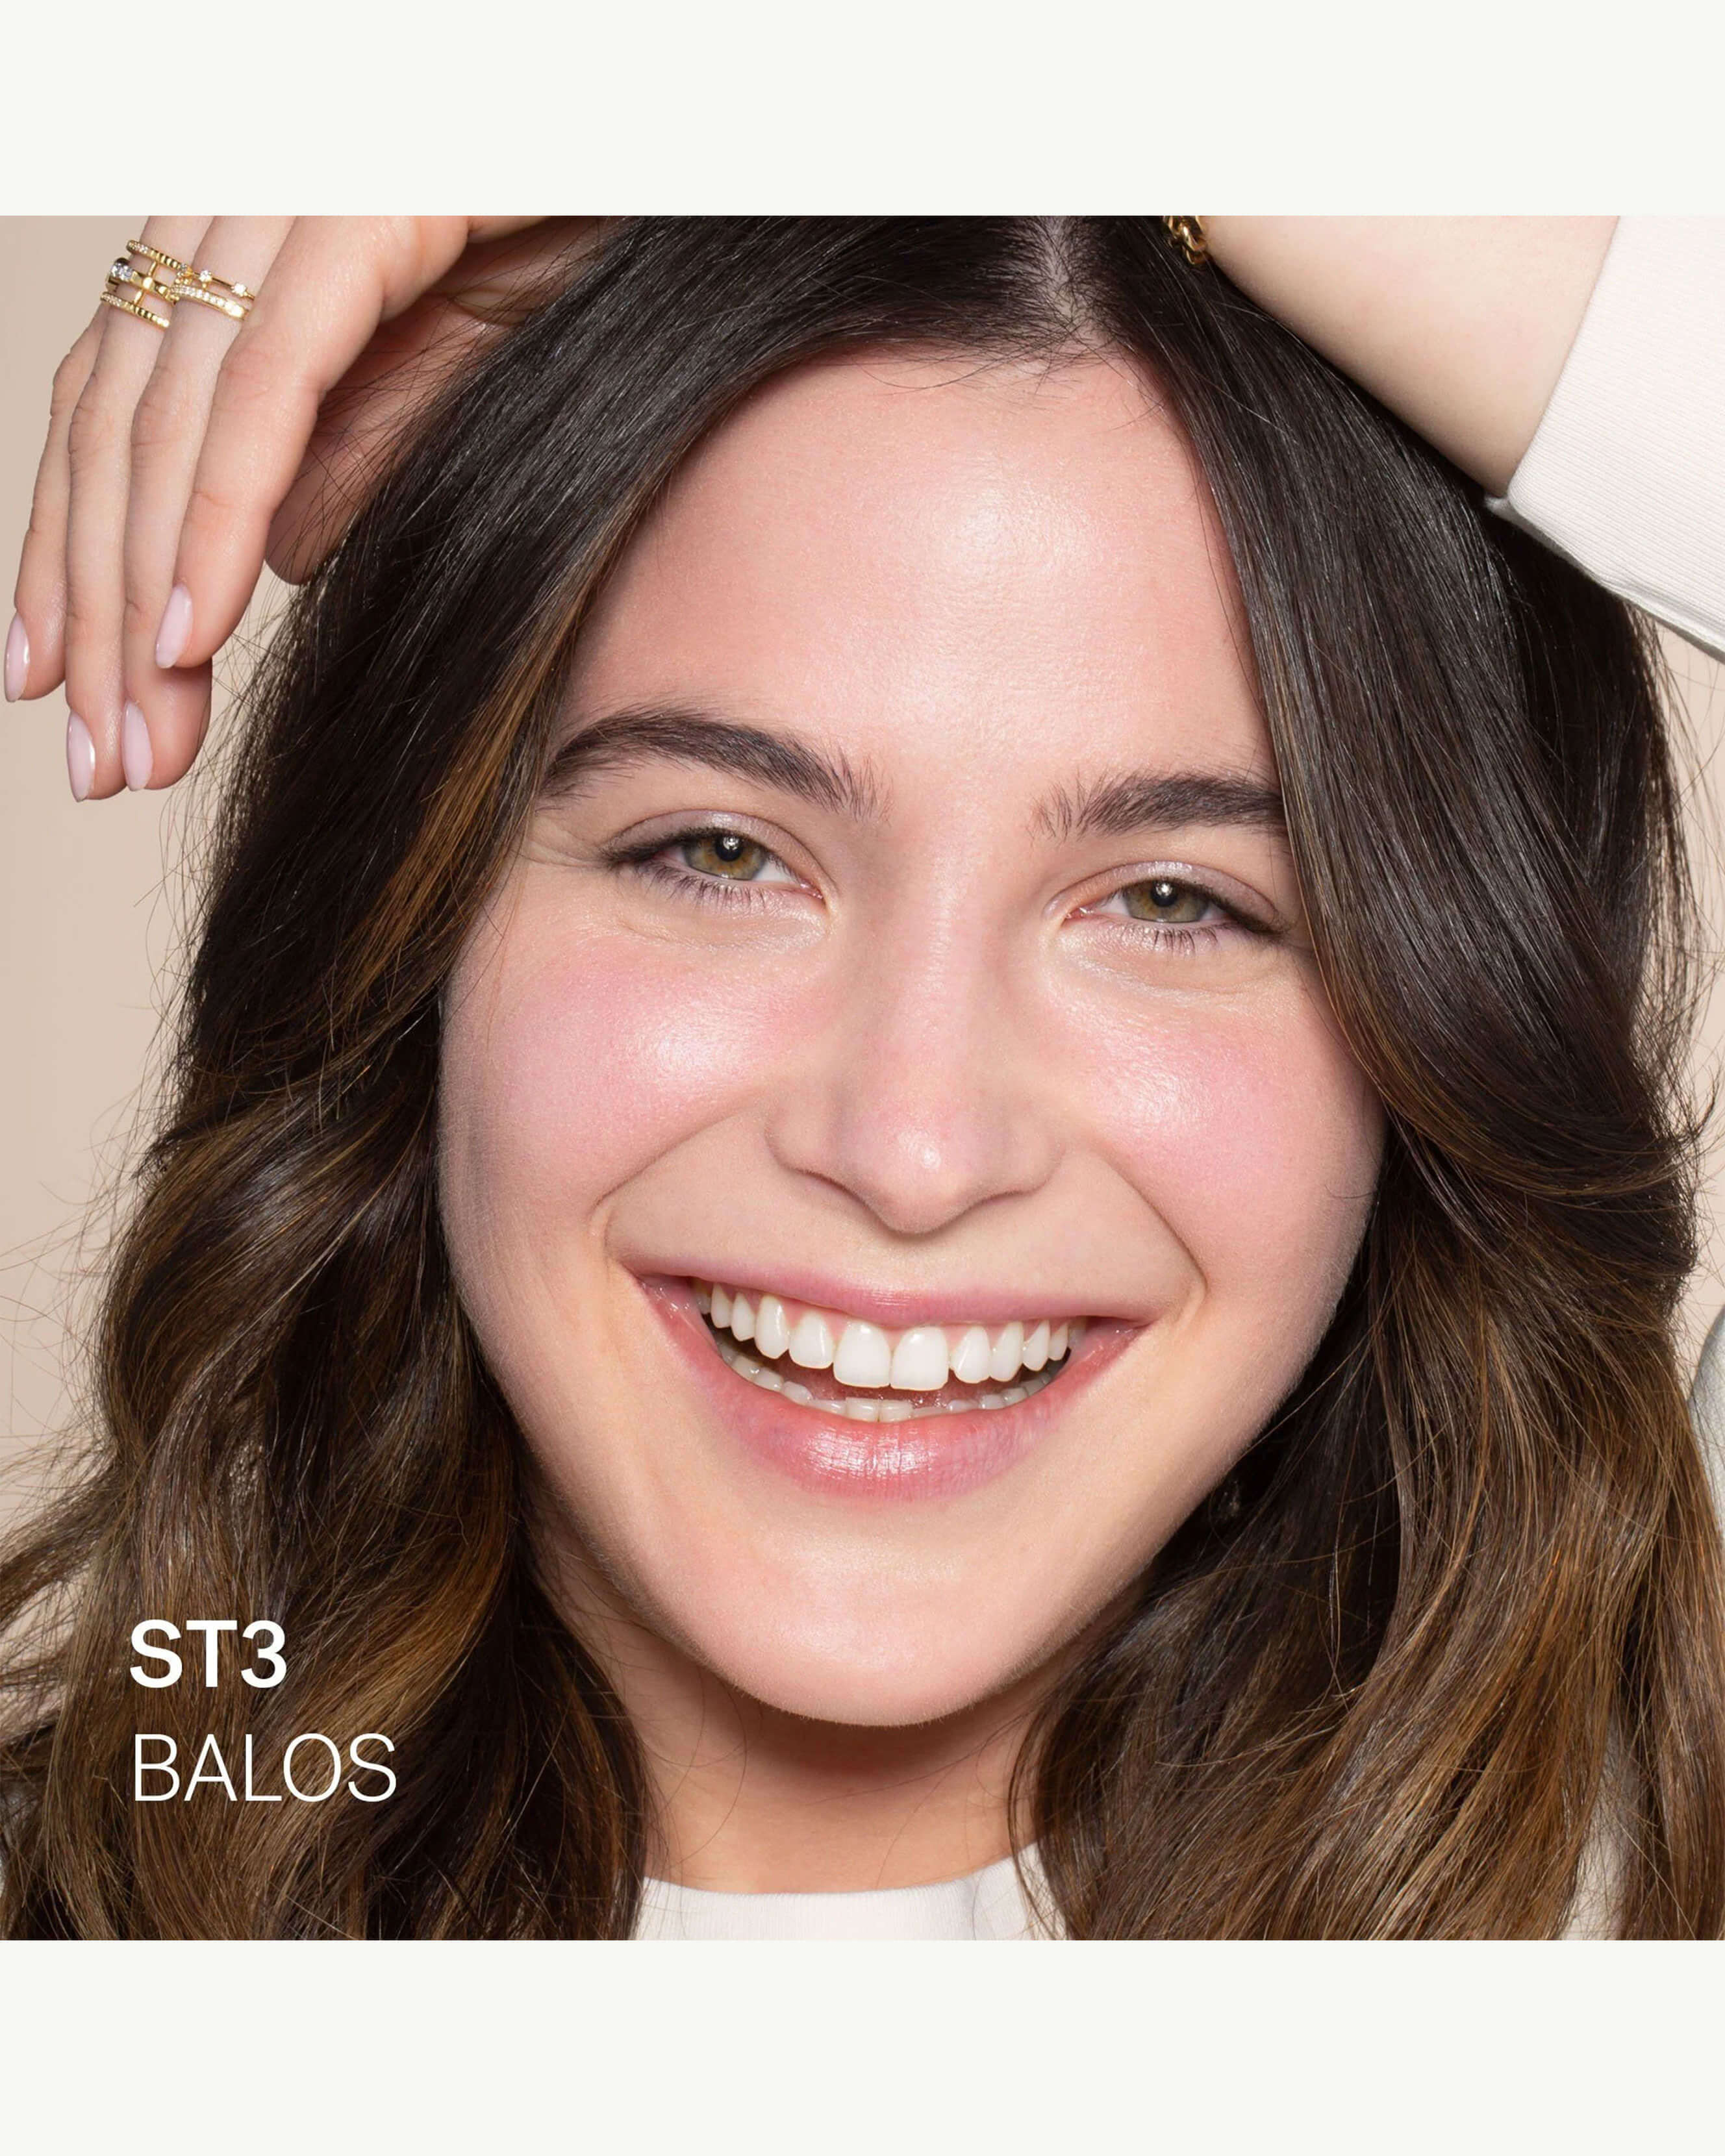 ST3 Balos (for fair skin with neutral cool undertones)